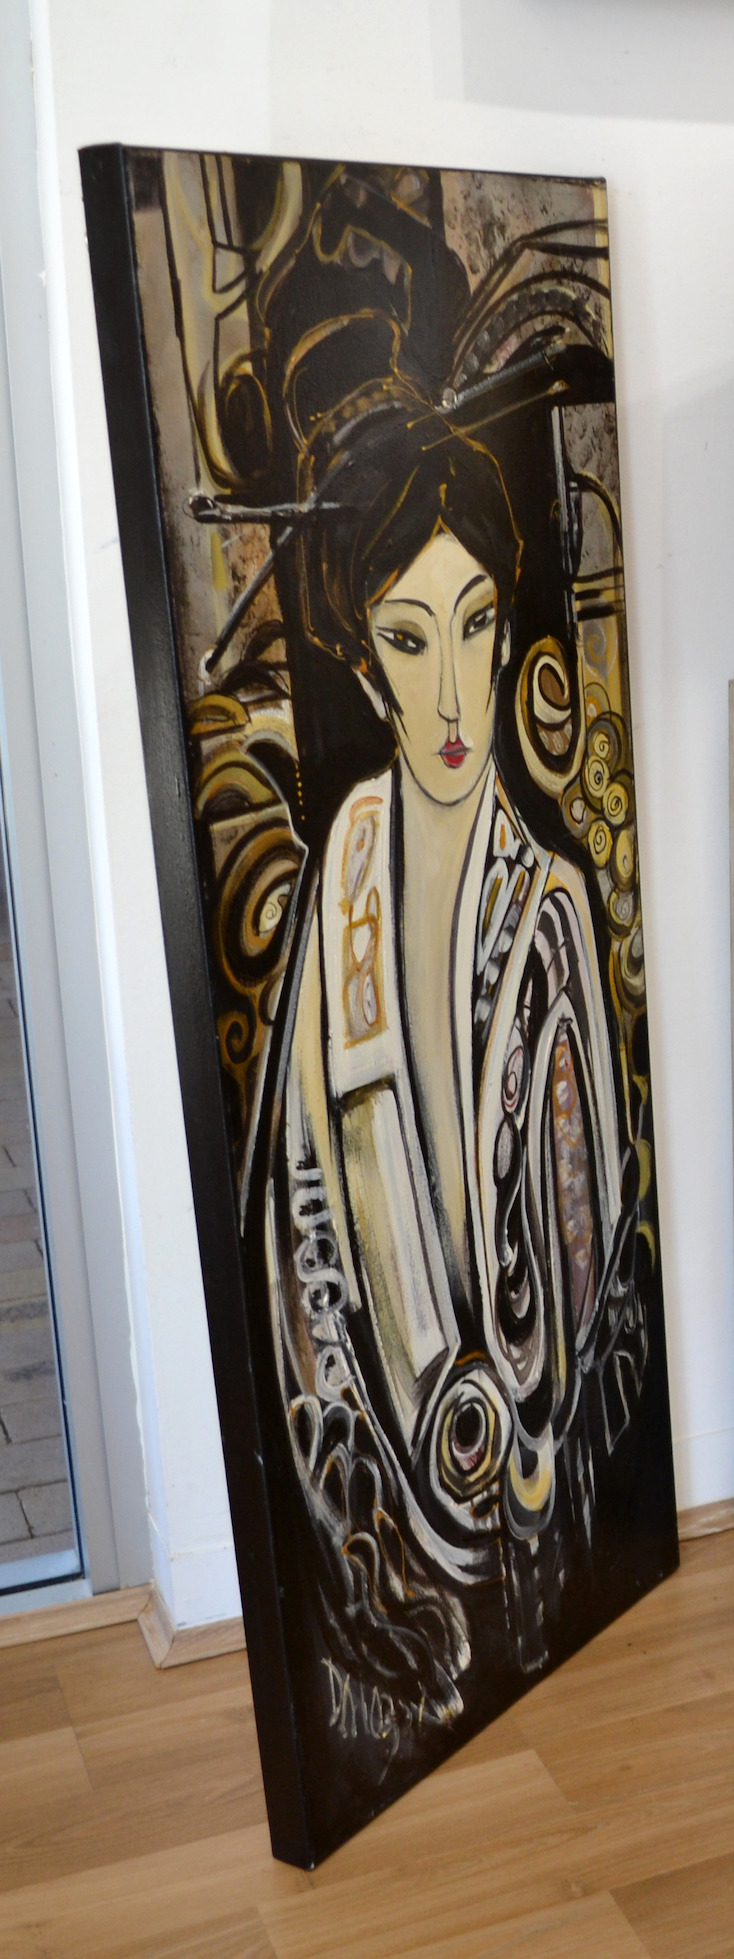 Framed Side View Of Figure Painting "Geisha 6" By Lucette Dalozzo